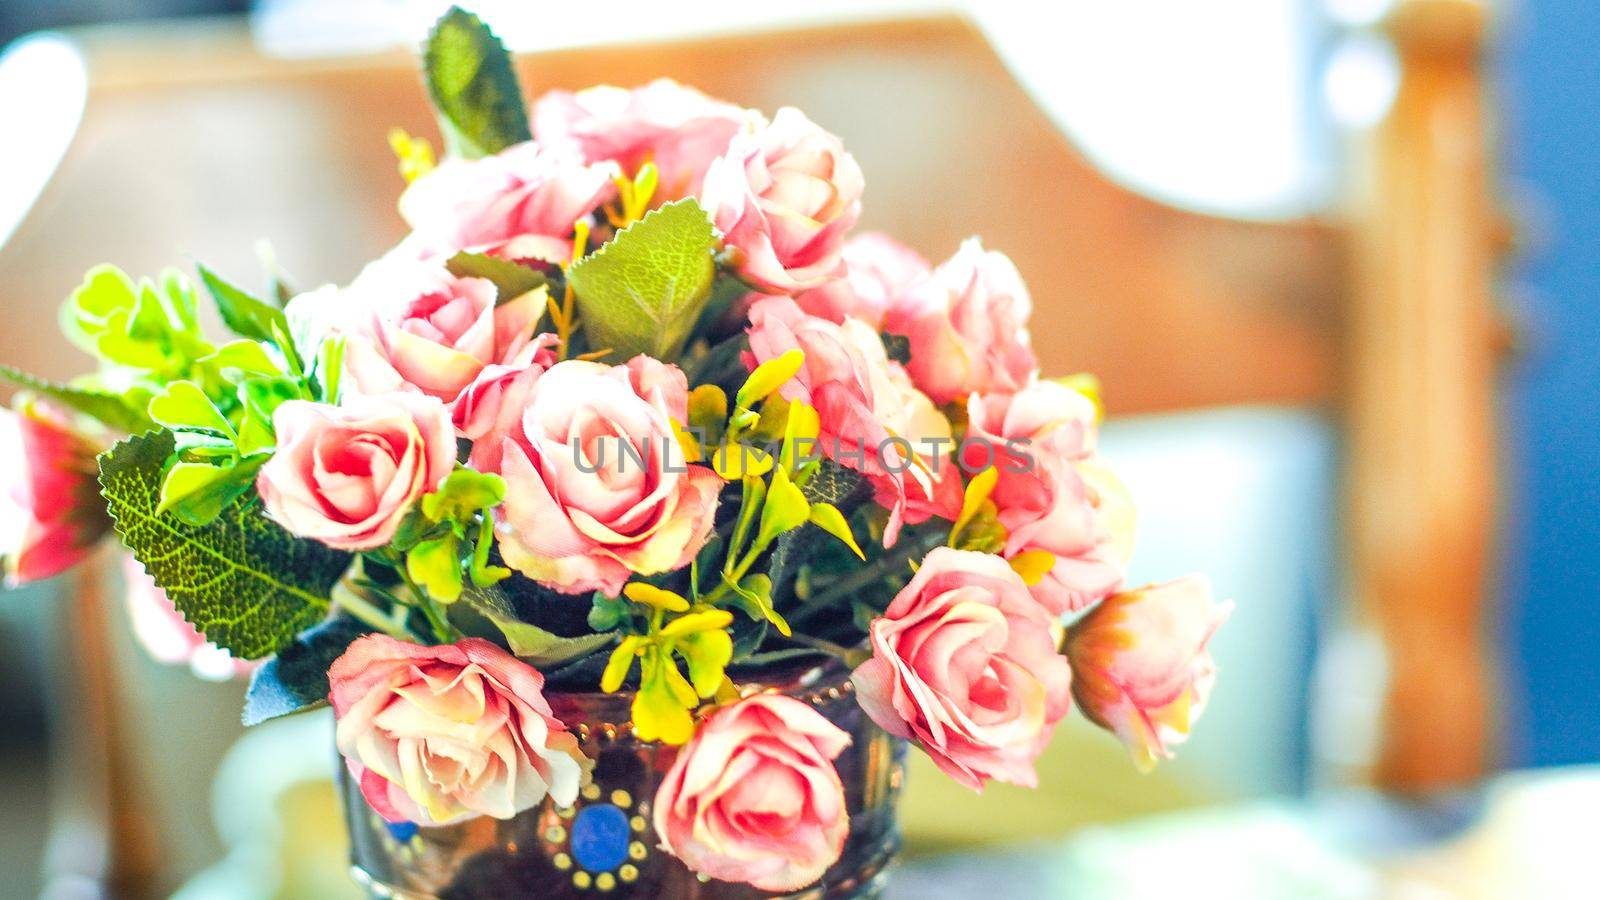 Bouquet vintage group of pink roses on wooden table, soft focus by Petrichor